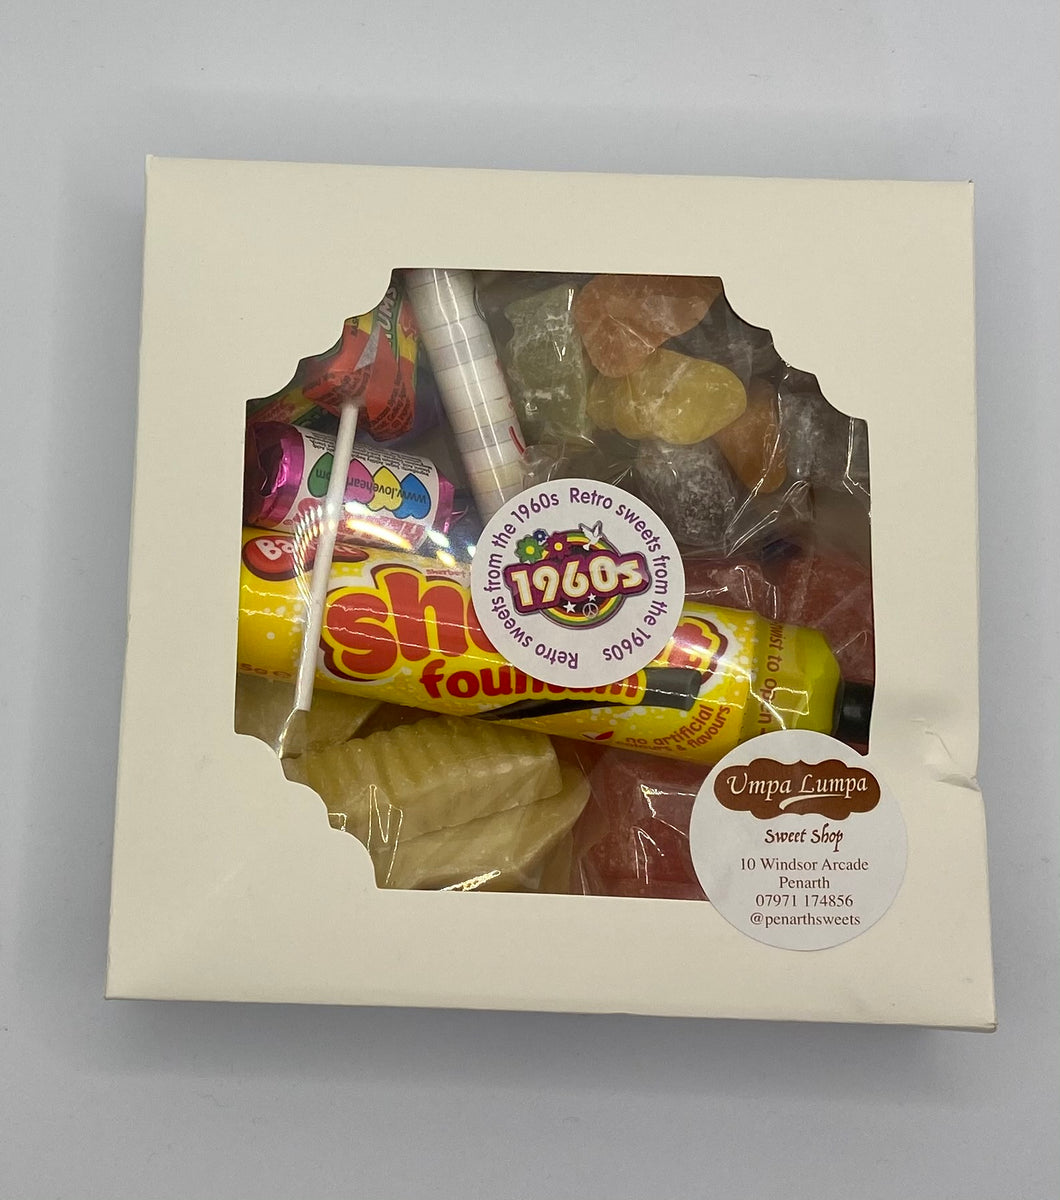 Retro Gift Box with Sweets From the 1960s